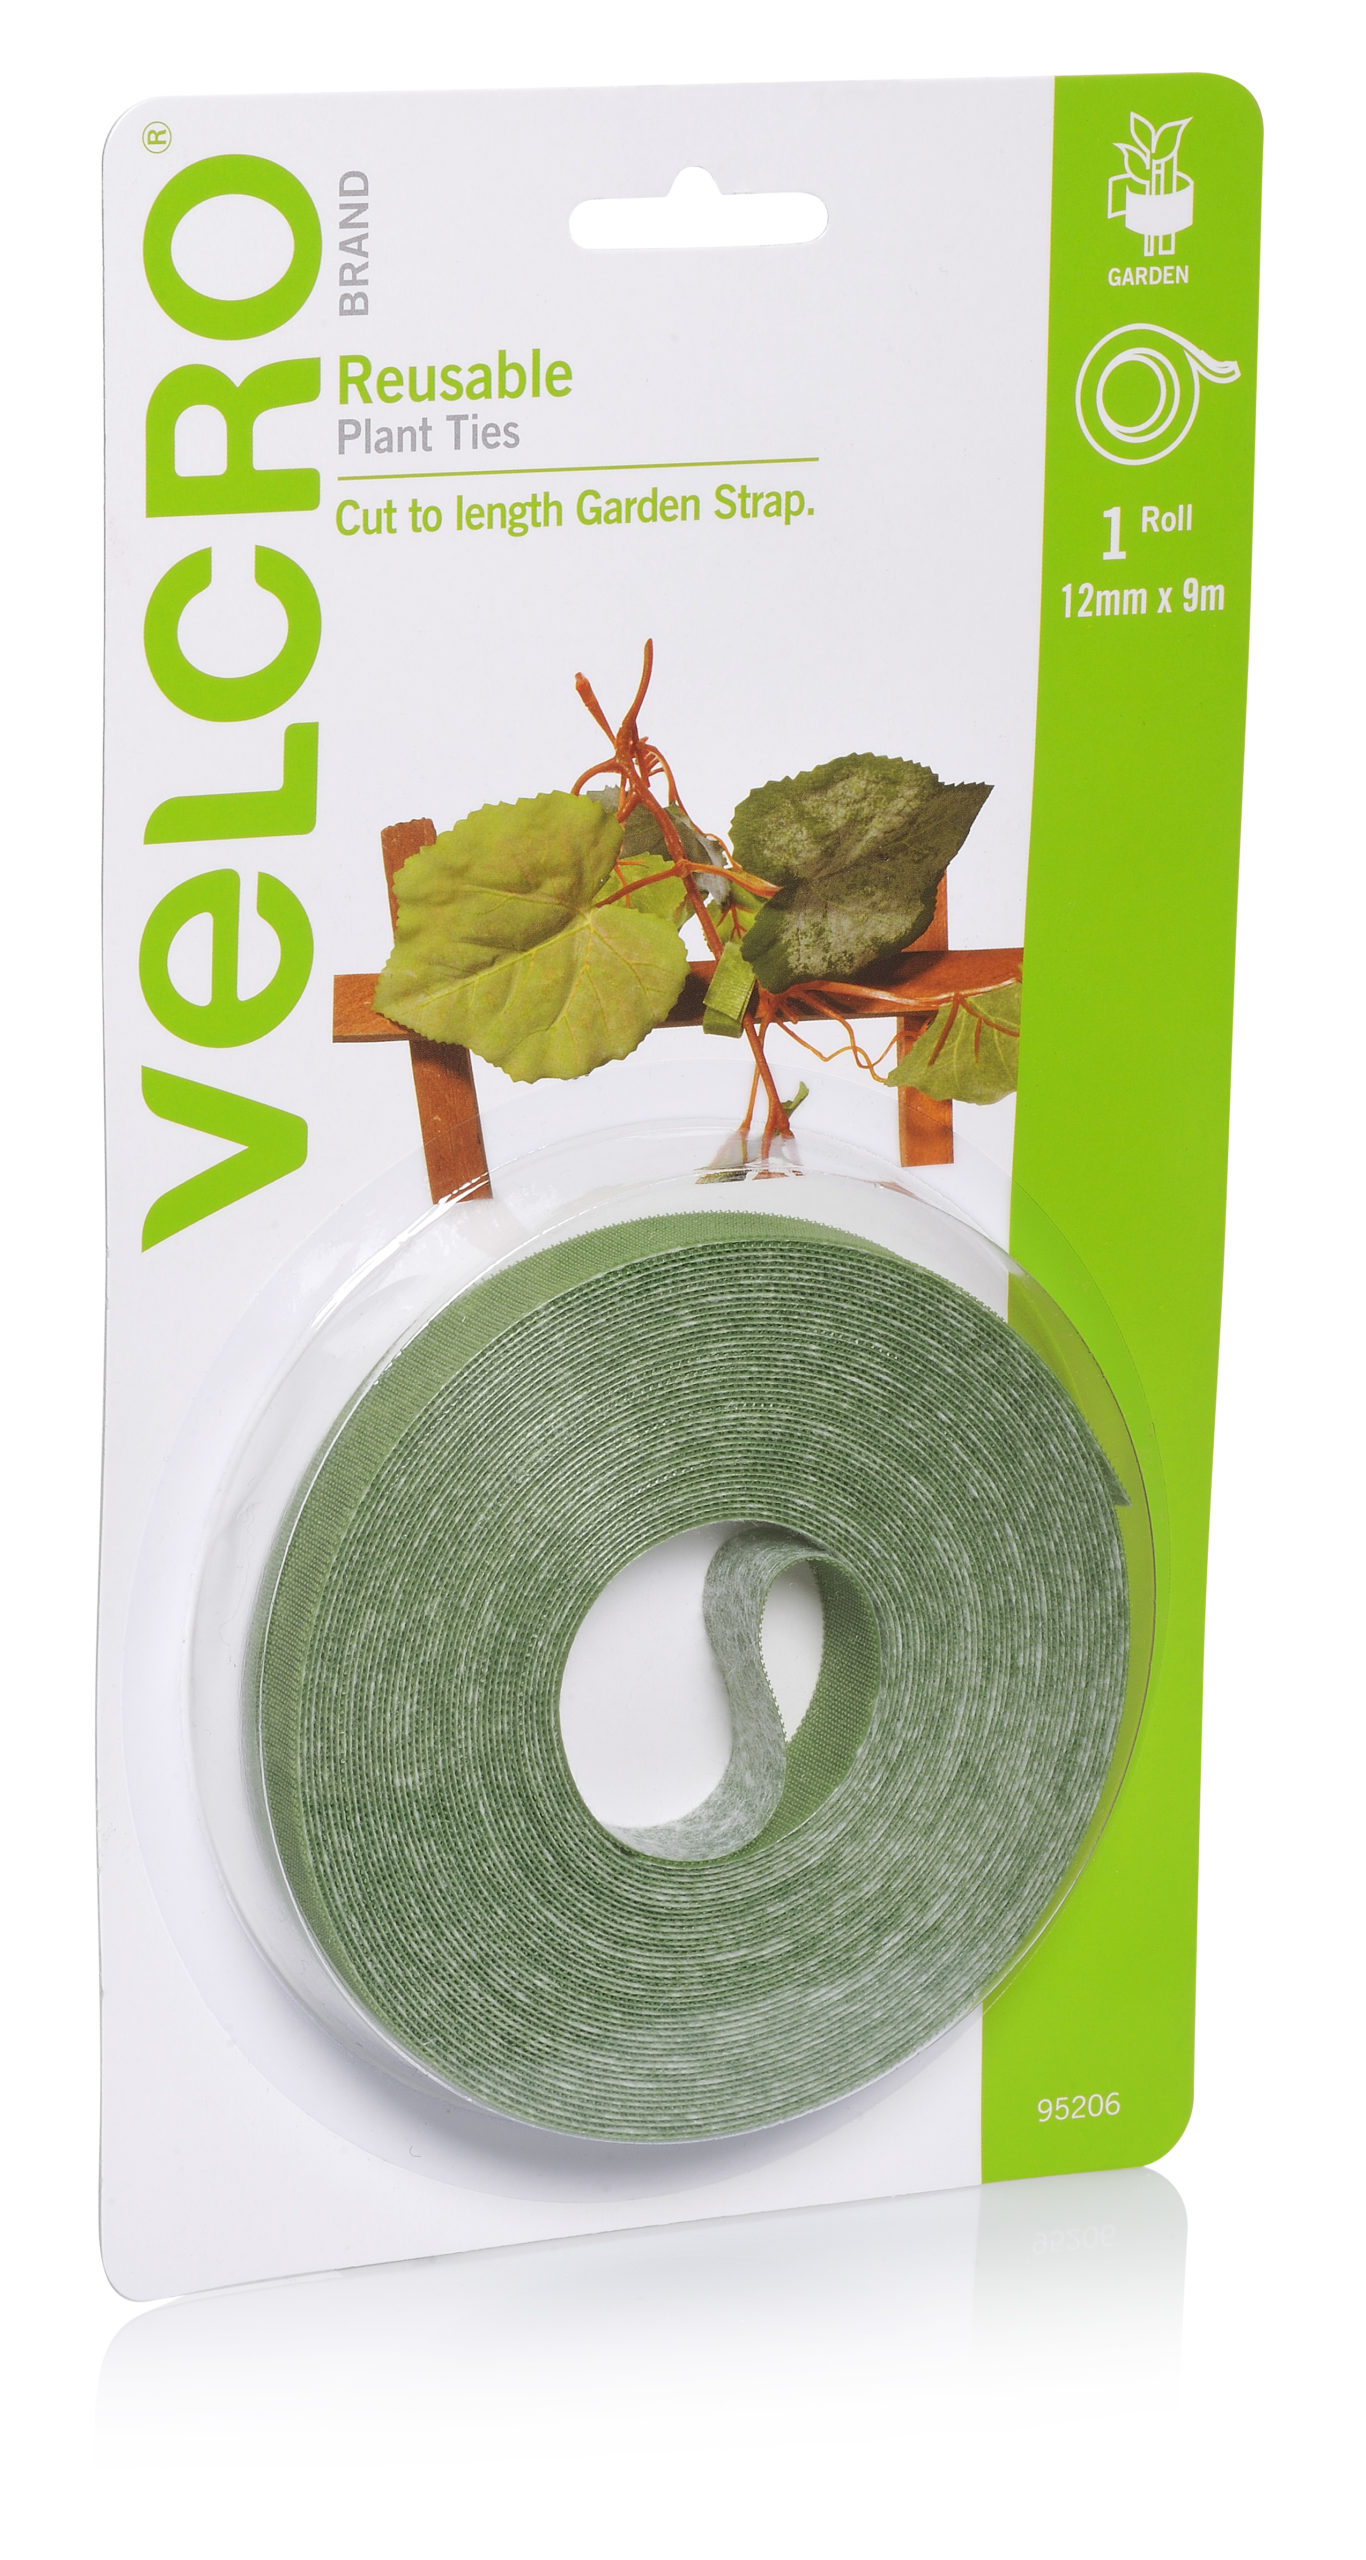 Reusable Plant ties Refill pack - V Tapes